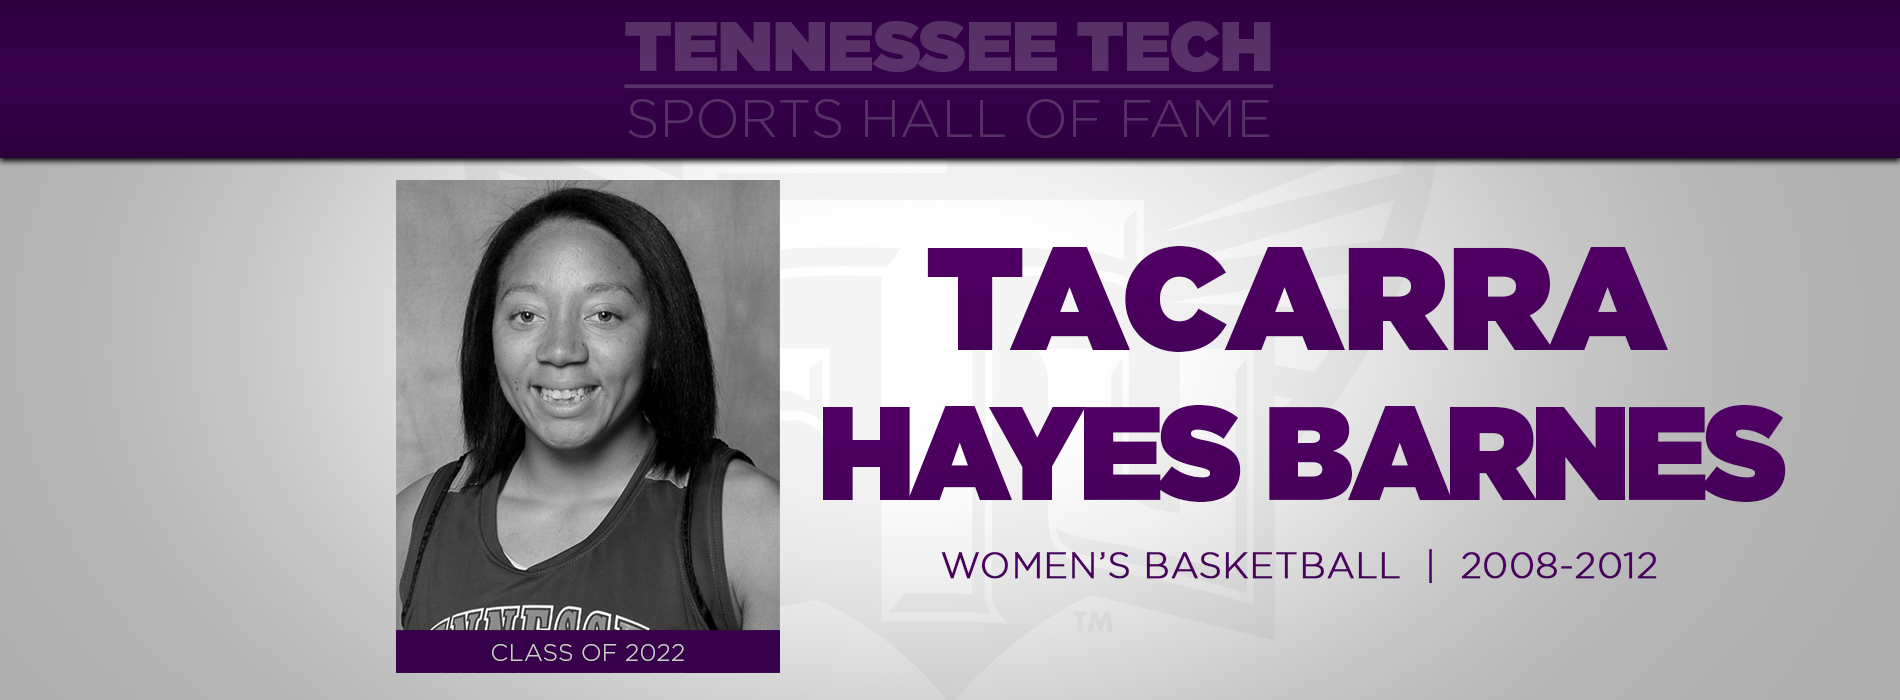 Hayes Barnes to be inducted into TTU Sports Hall of Fame Friday, Nov. 4